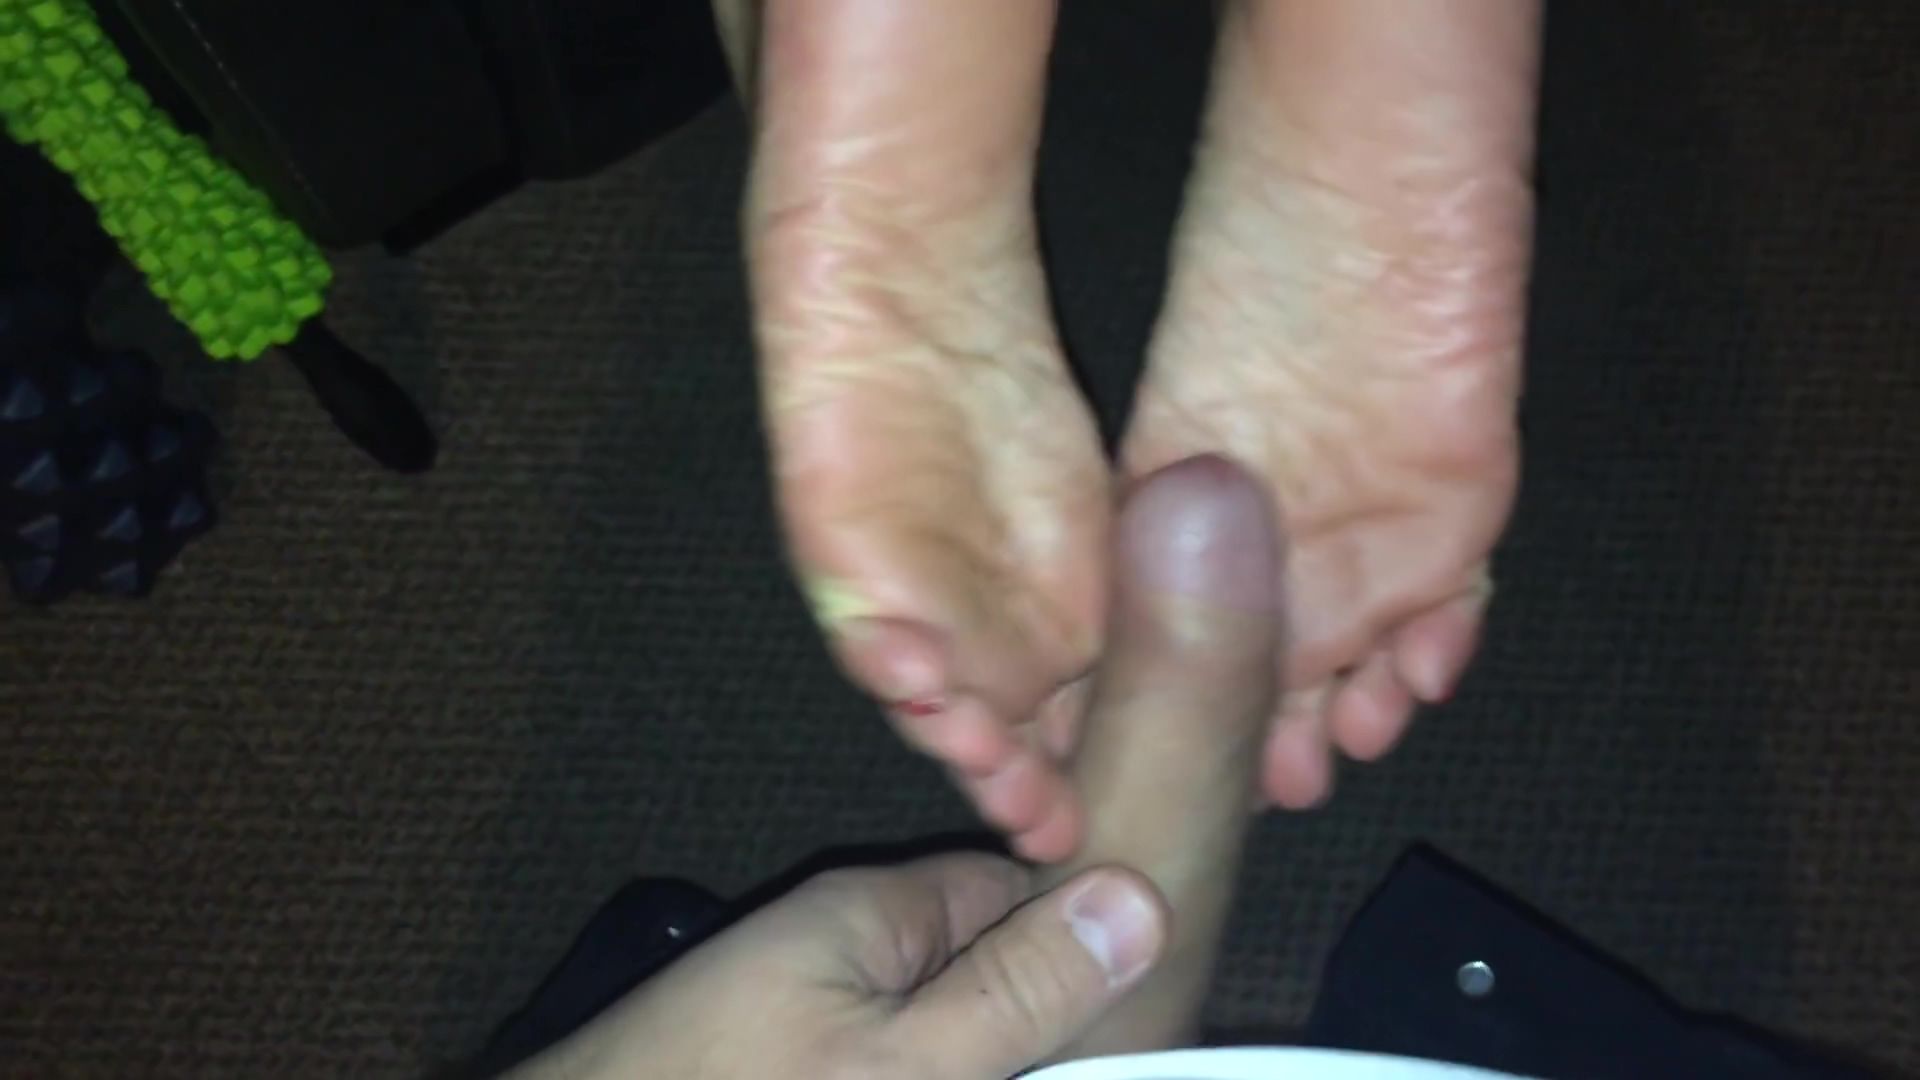 Cousin Cumming On My Wifes Sexy Soles In One Of My Favorite Kinks VirtualRealGay